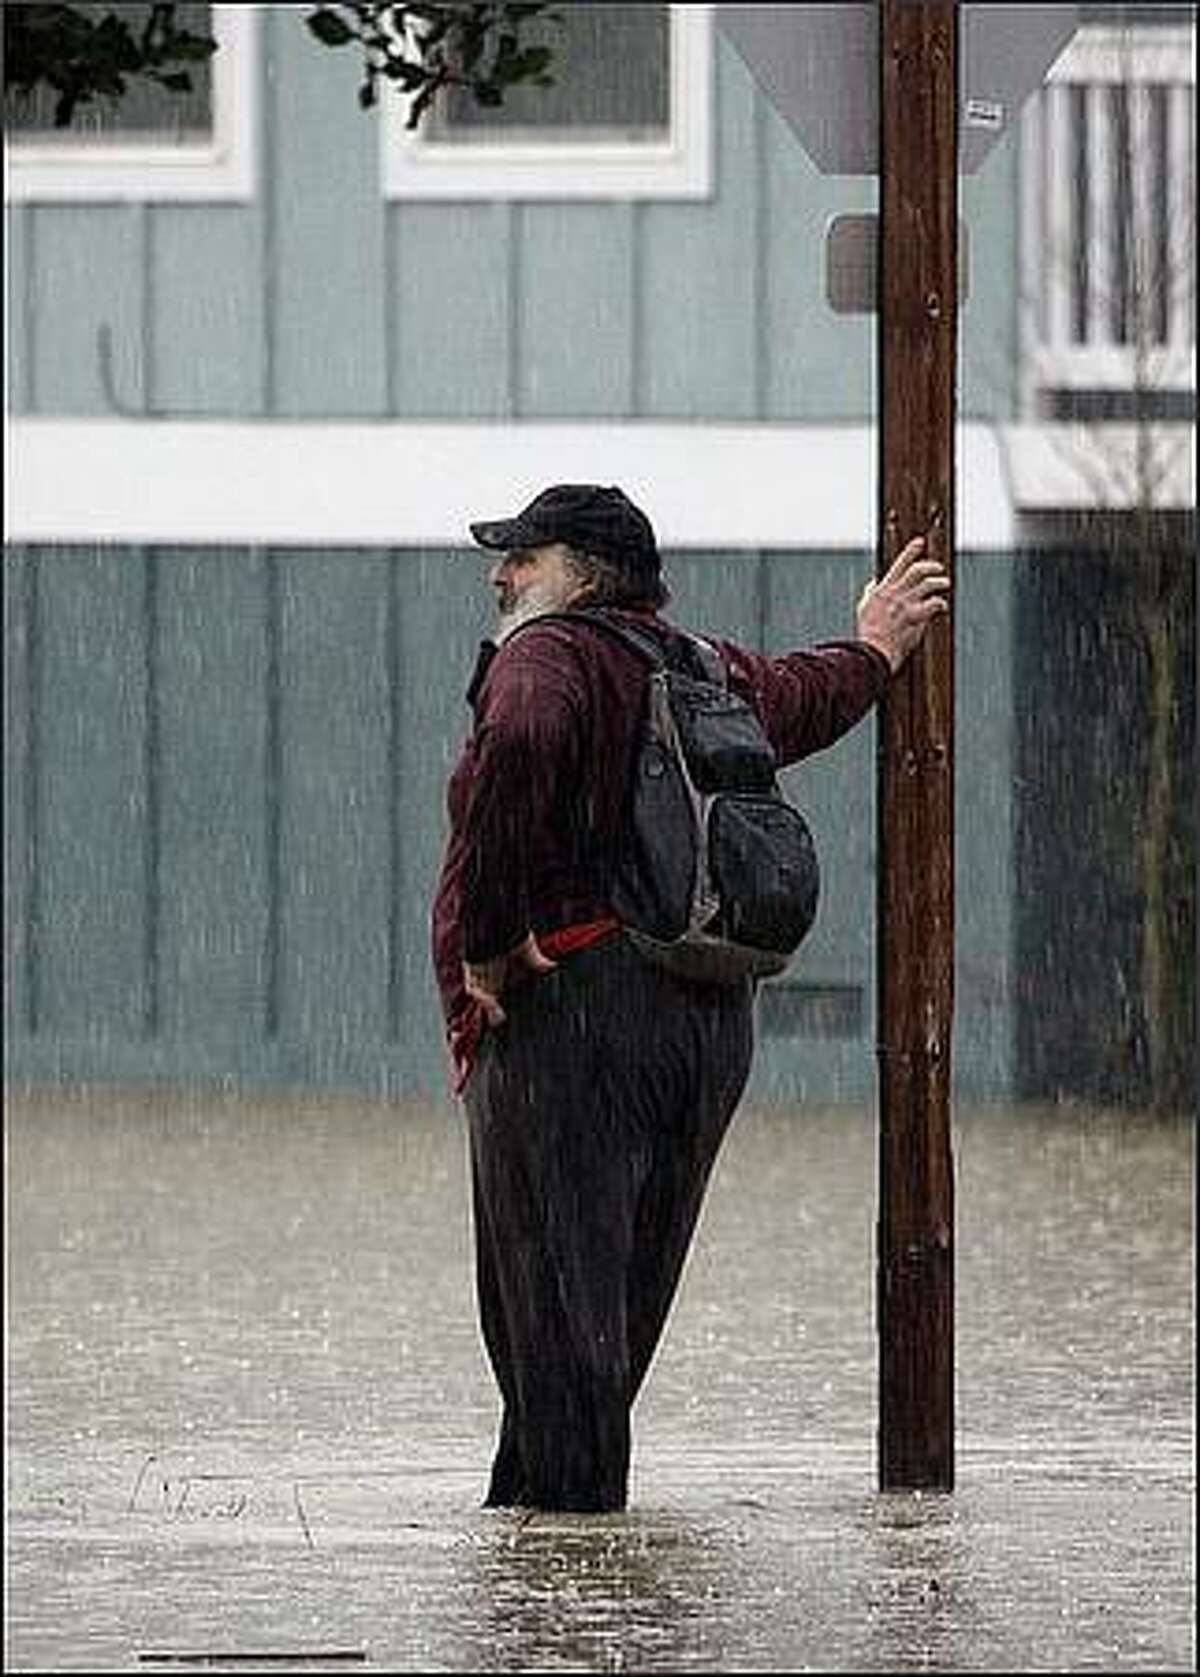 A man takes a break against a traffic sign while wading through floodwater in Snoqualmie, Wash. Rain and high winds lashed Washington state Wednesday, causing widespread avalanches, mudslides, flooding and road closures from rapid snowmelt and the three main highways across the Cascade Range were closed. (AP Photo/Elaine Thompson)